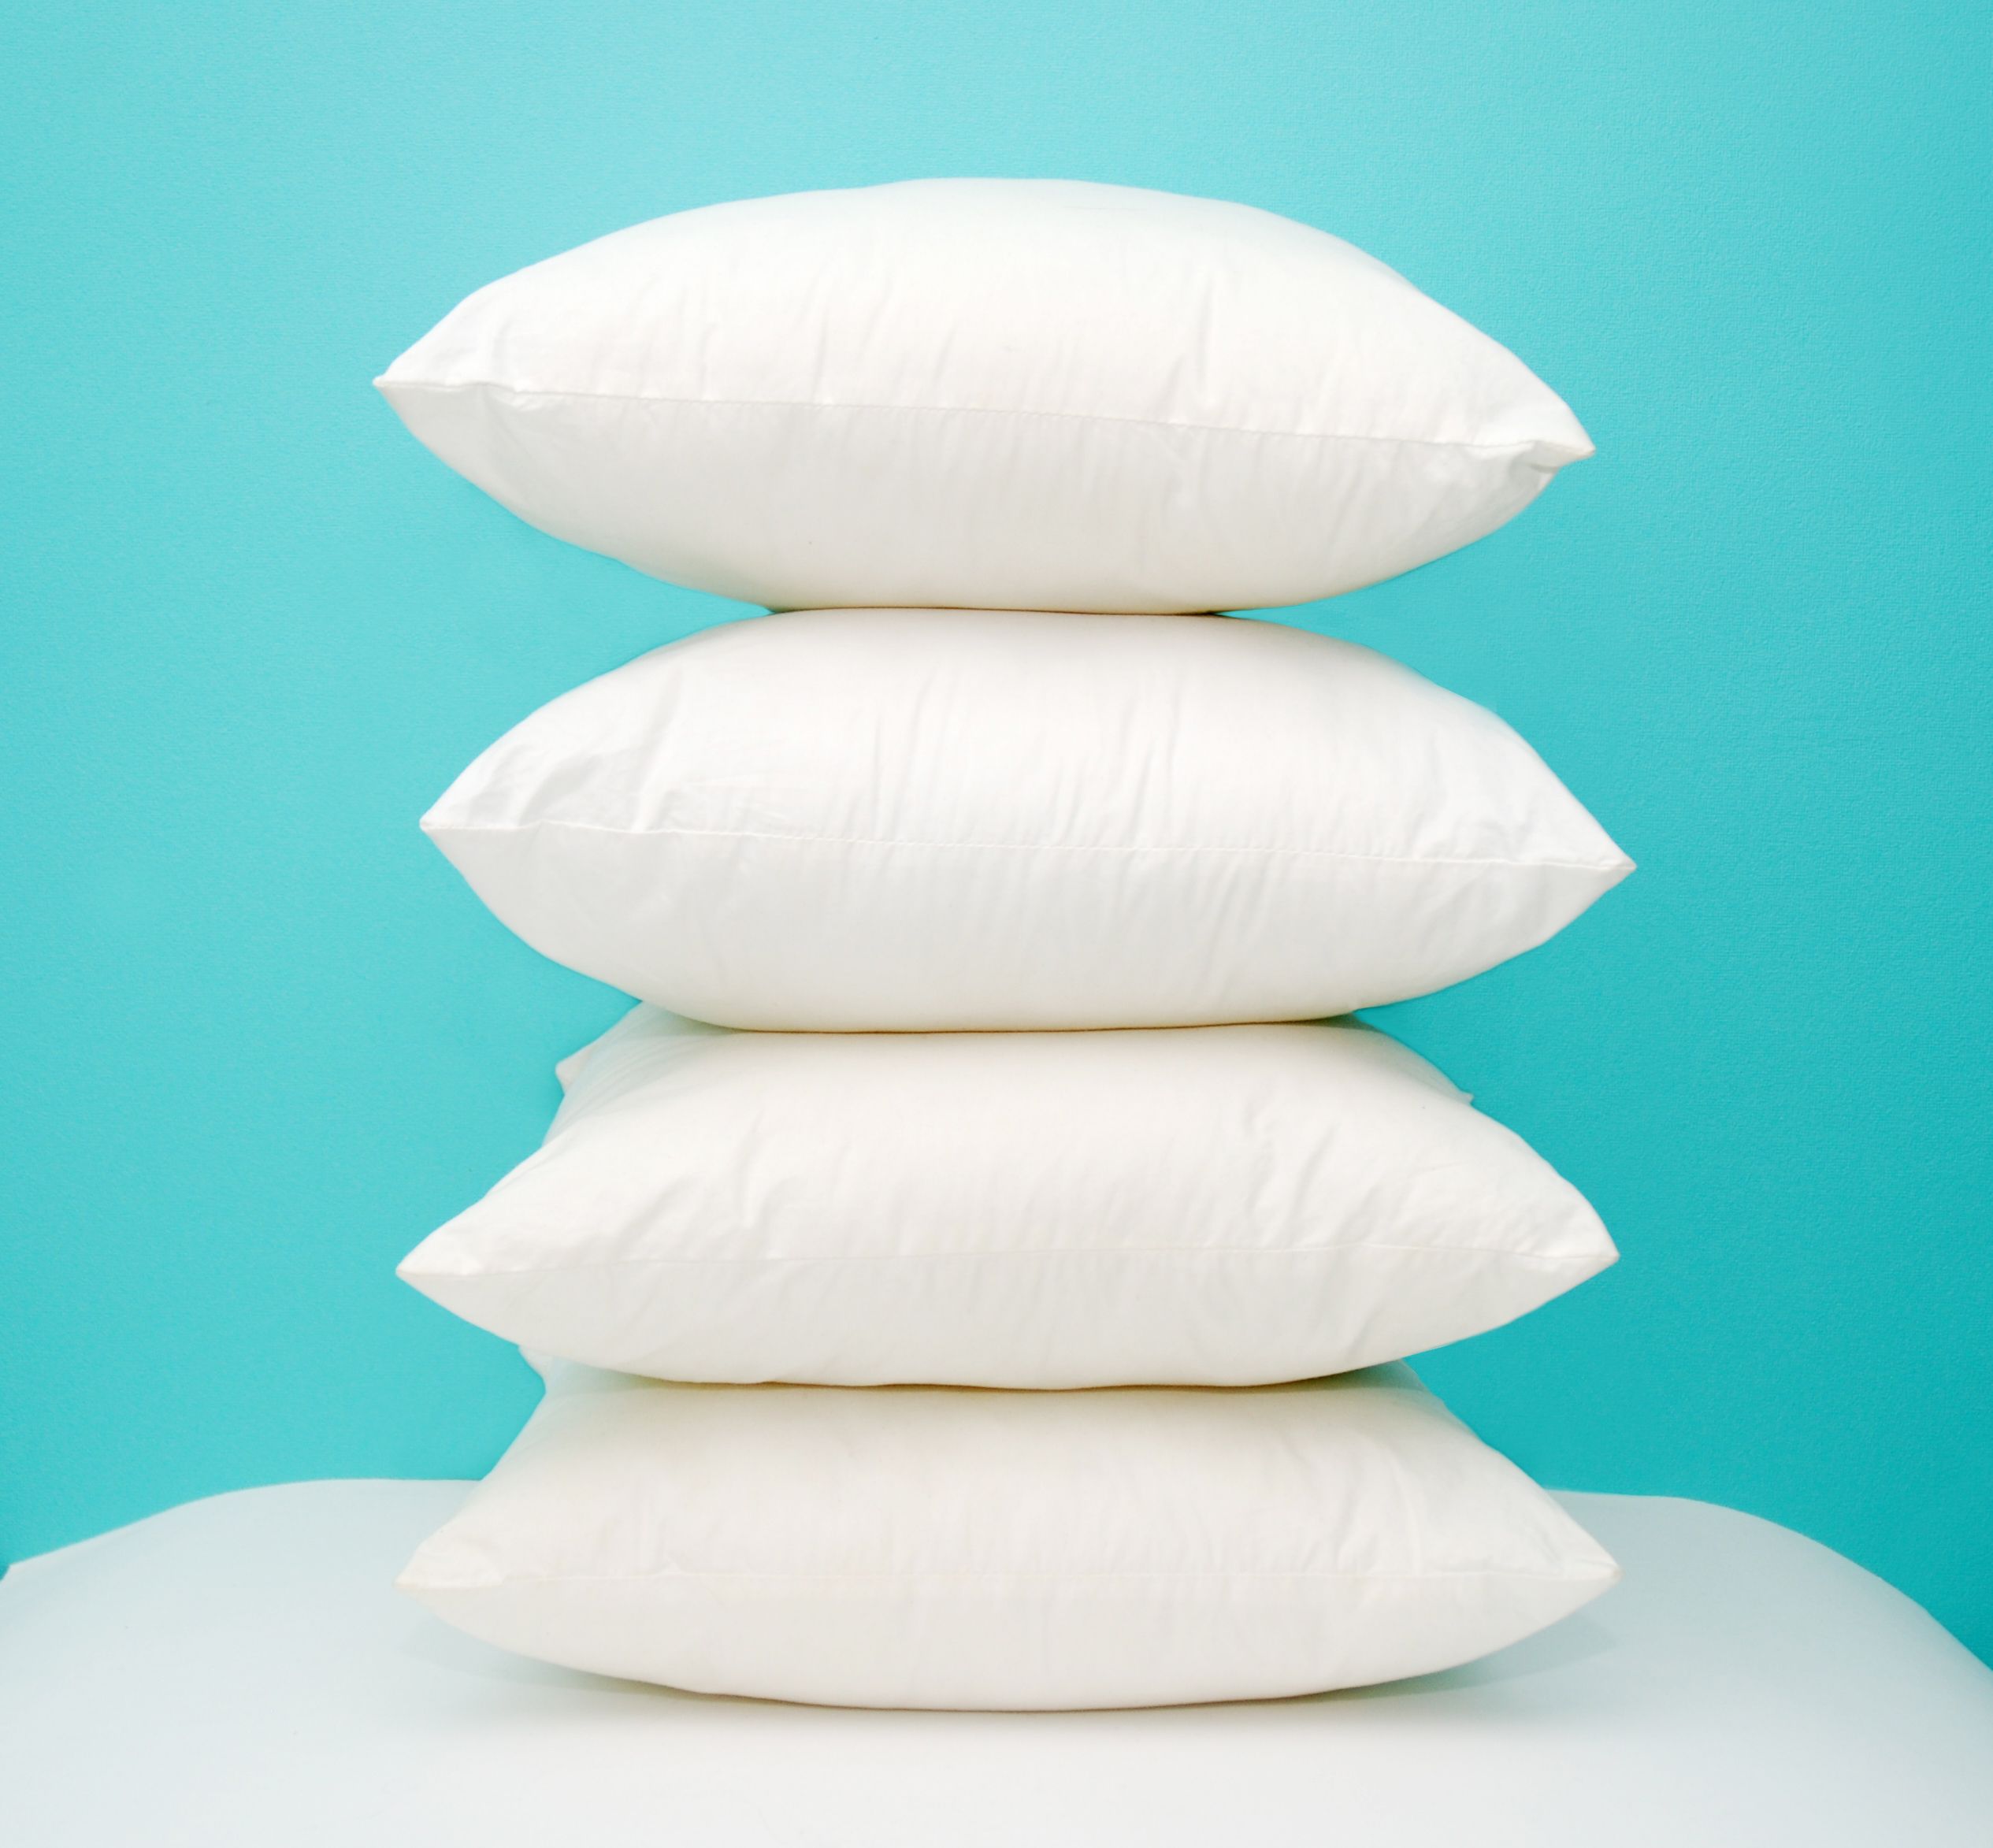 Bed Pillow Buying Guide - How to Shop 